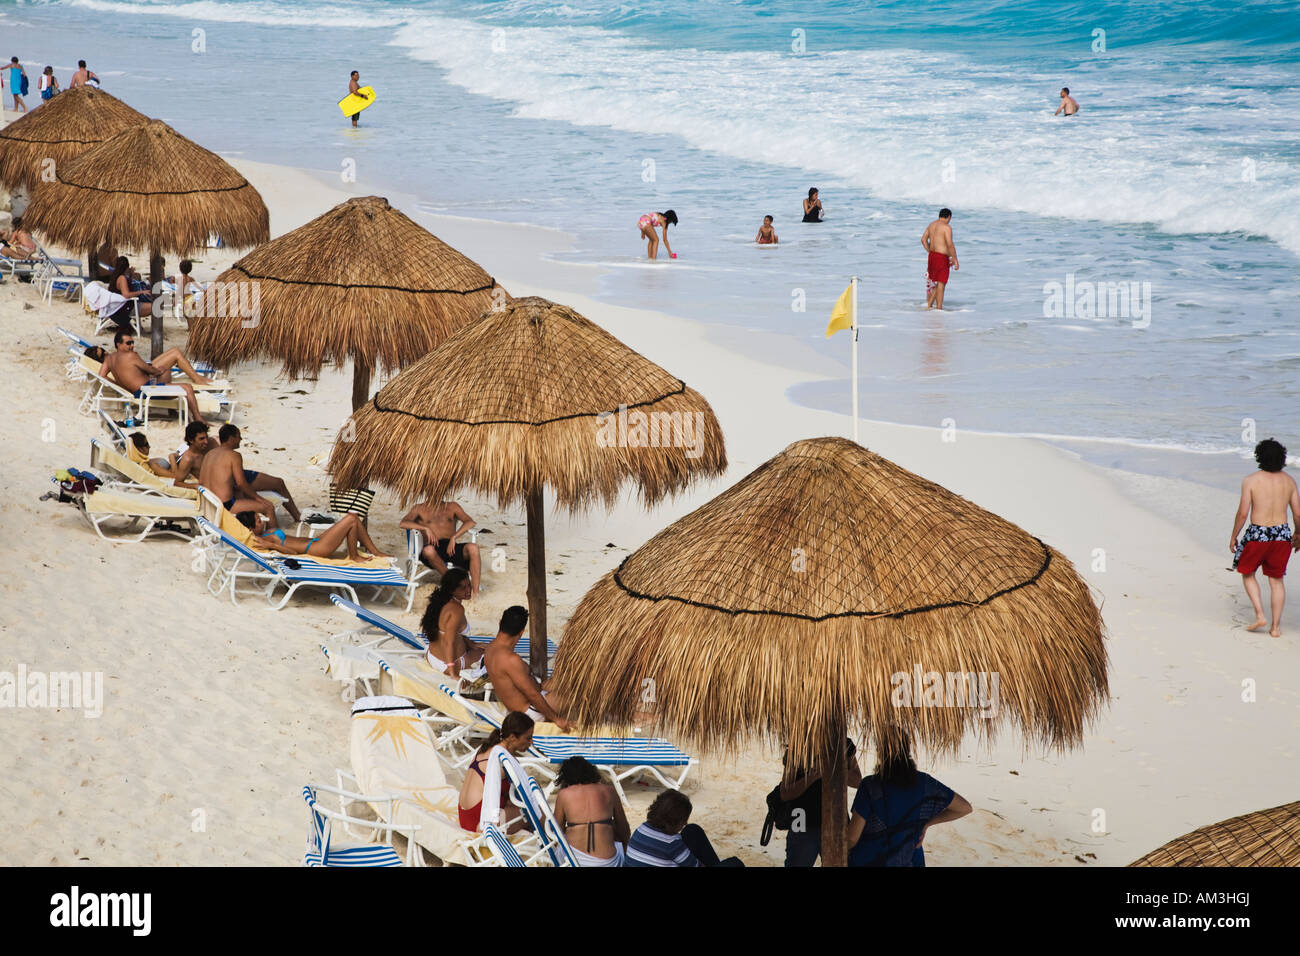 The turquoise waters and white sand beaches of Cancun on the Yucatan Peninsula in Quintana Roo Mexico Stock Photo